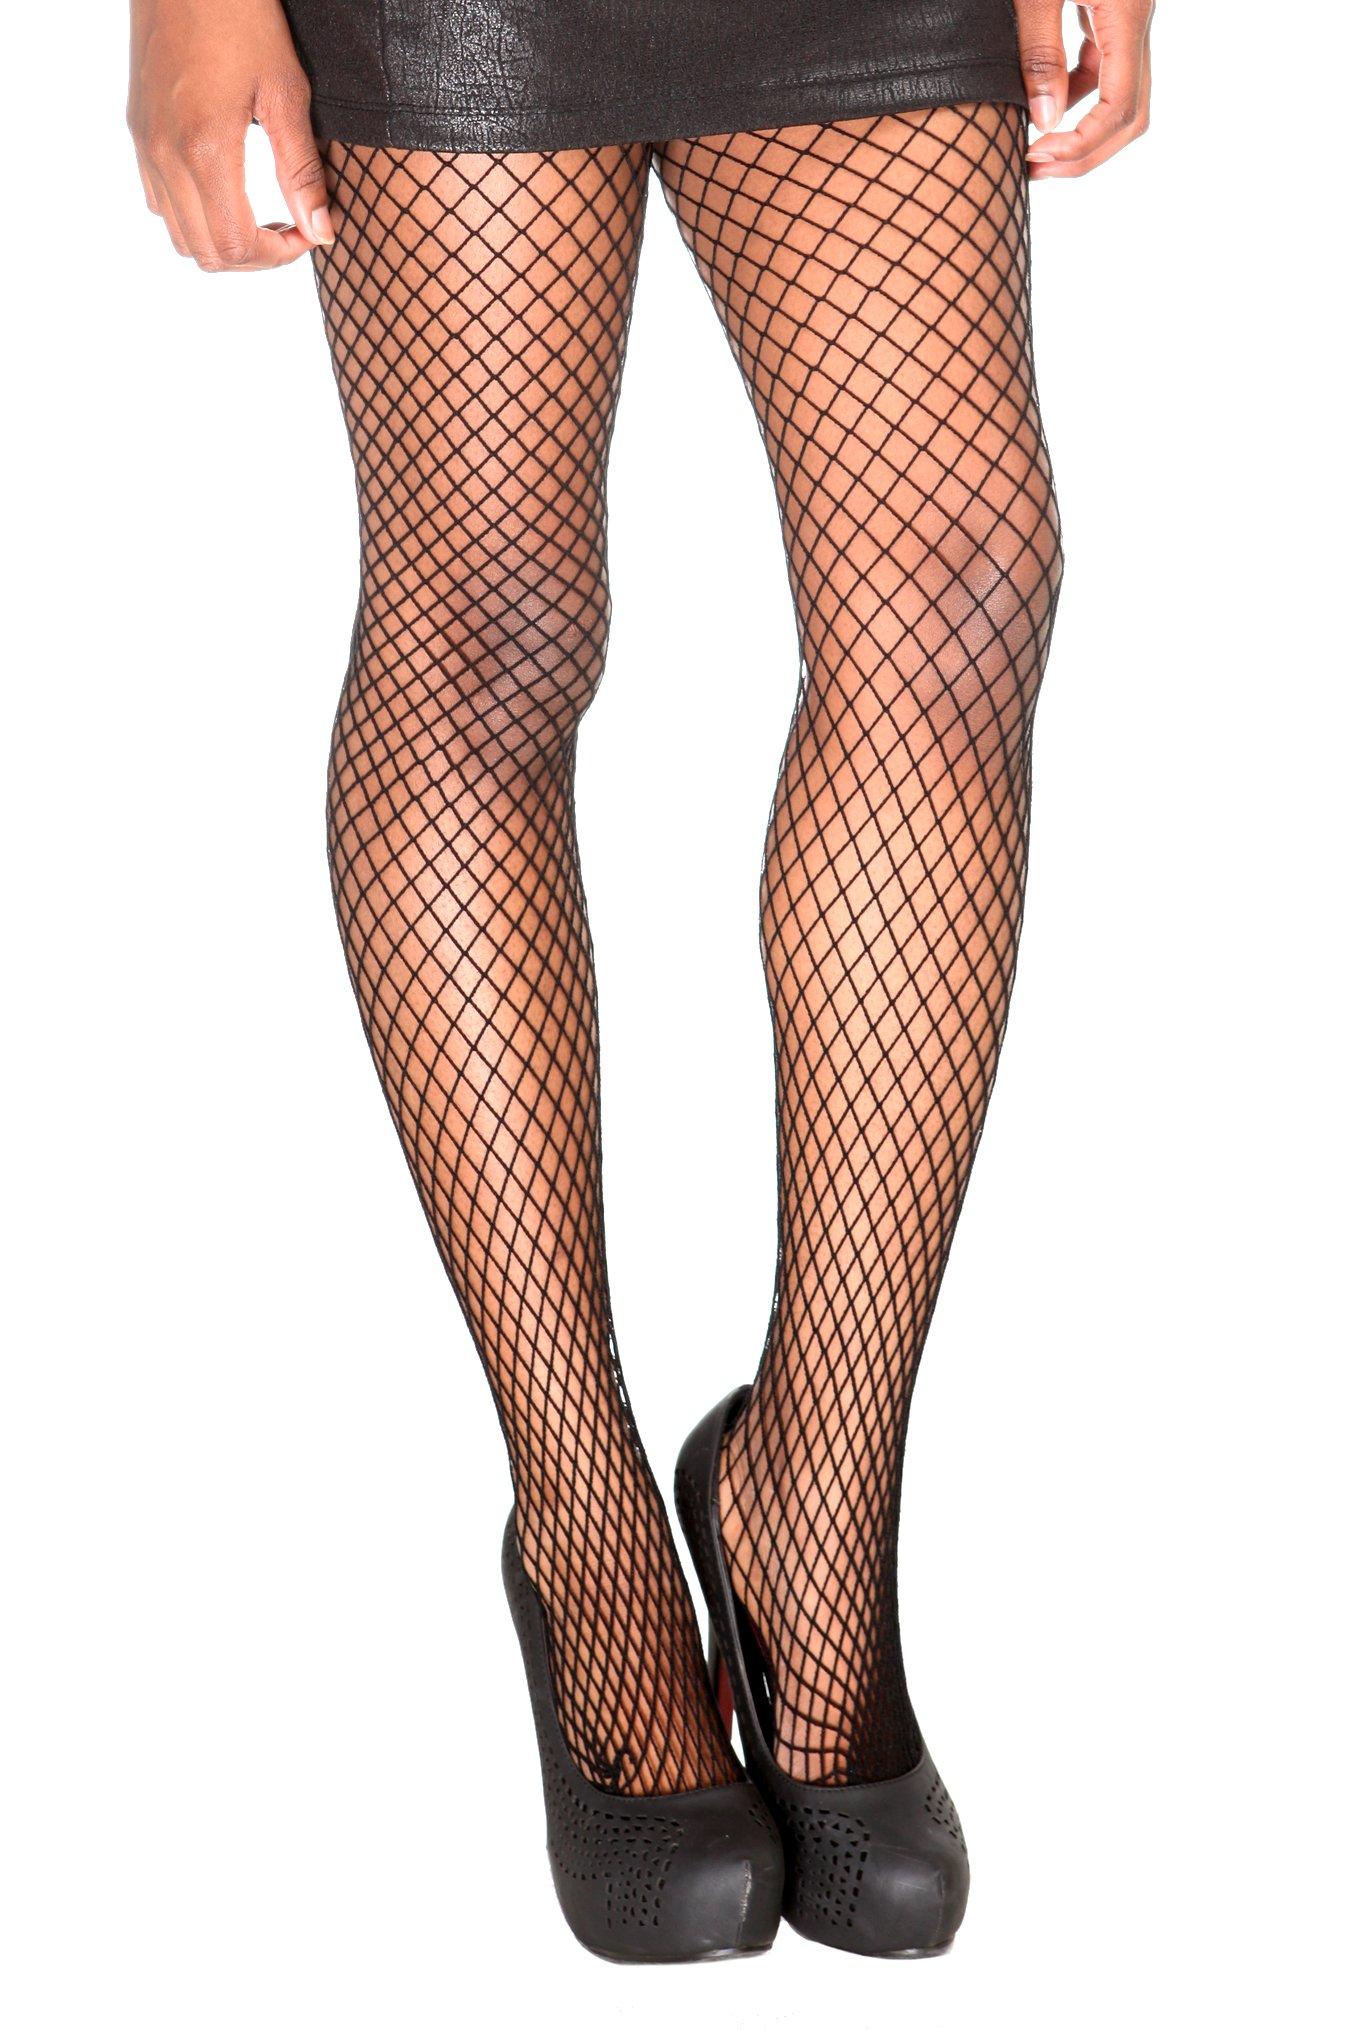 HOT TOPIC PLUS XL SIZE BLACK MEDIUM FISHNET FOOTED TIGHTS